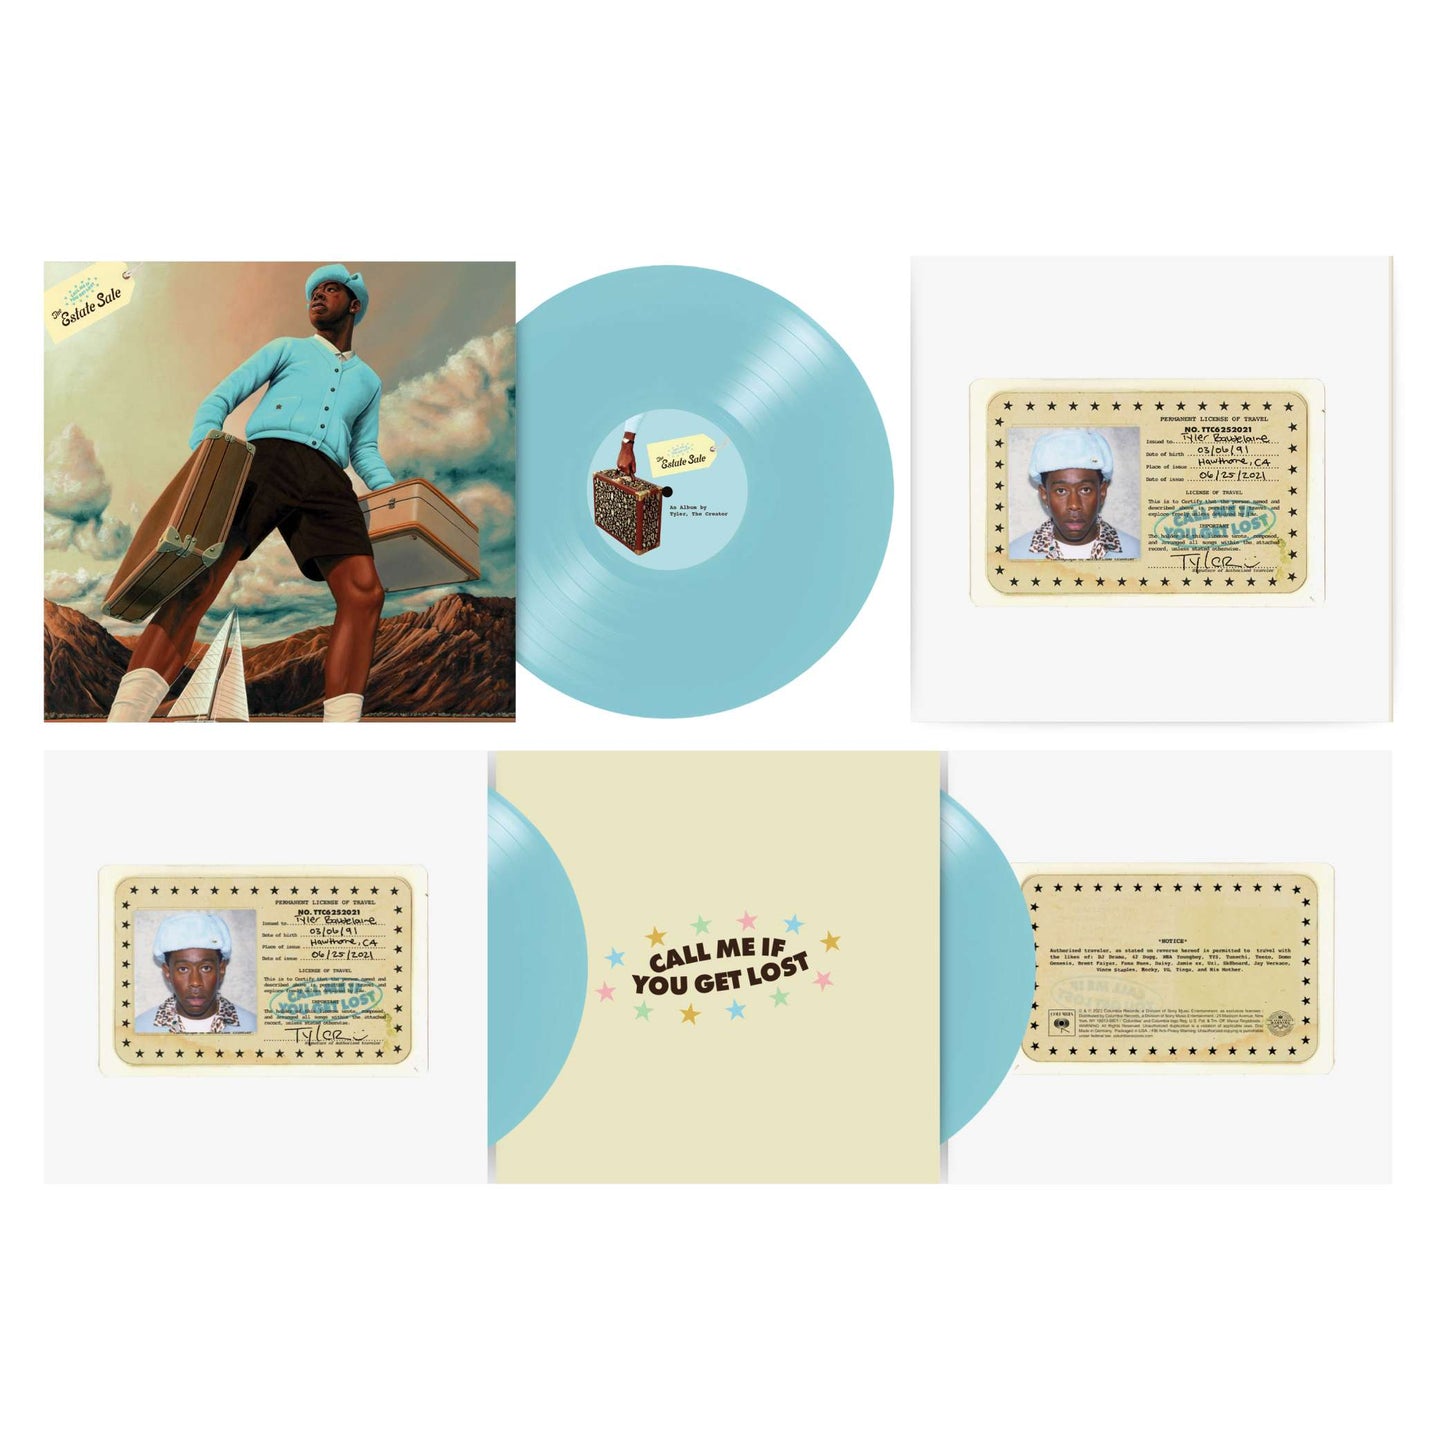 Tyler The Creator: Call Me If You Get Lost (Geneva Blue Vinyl) (Limited Edition) 3lps